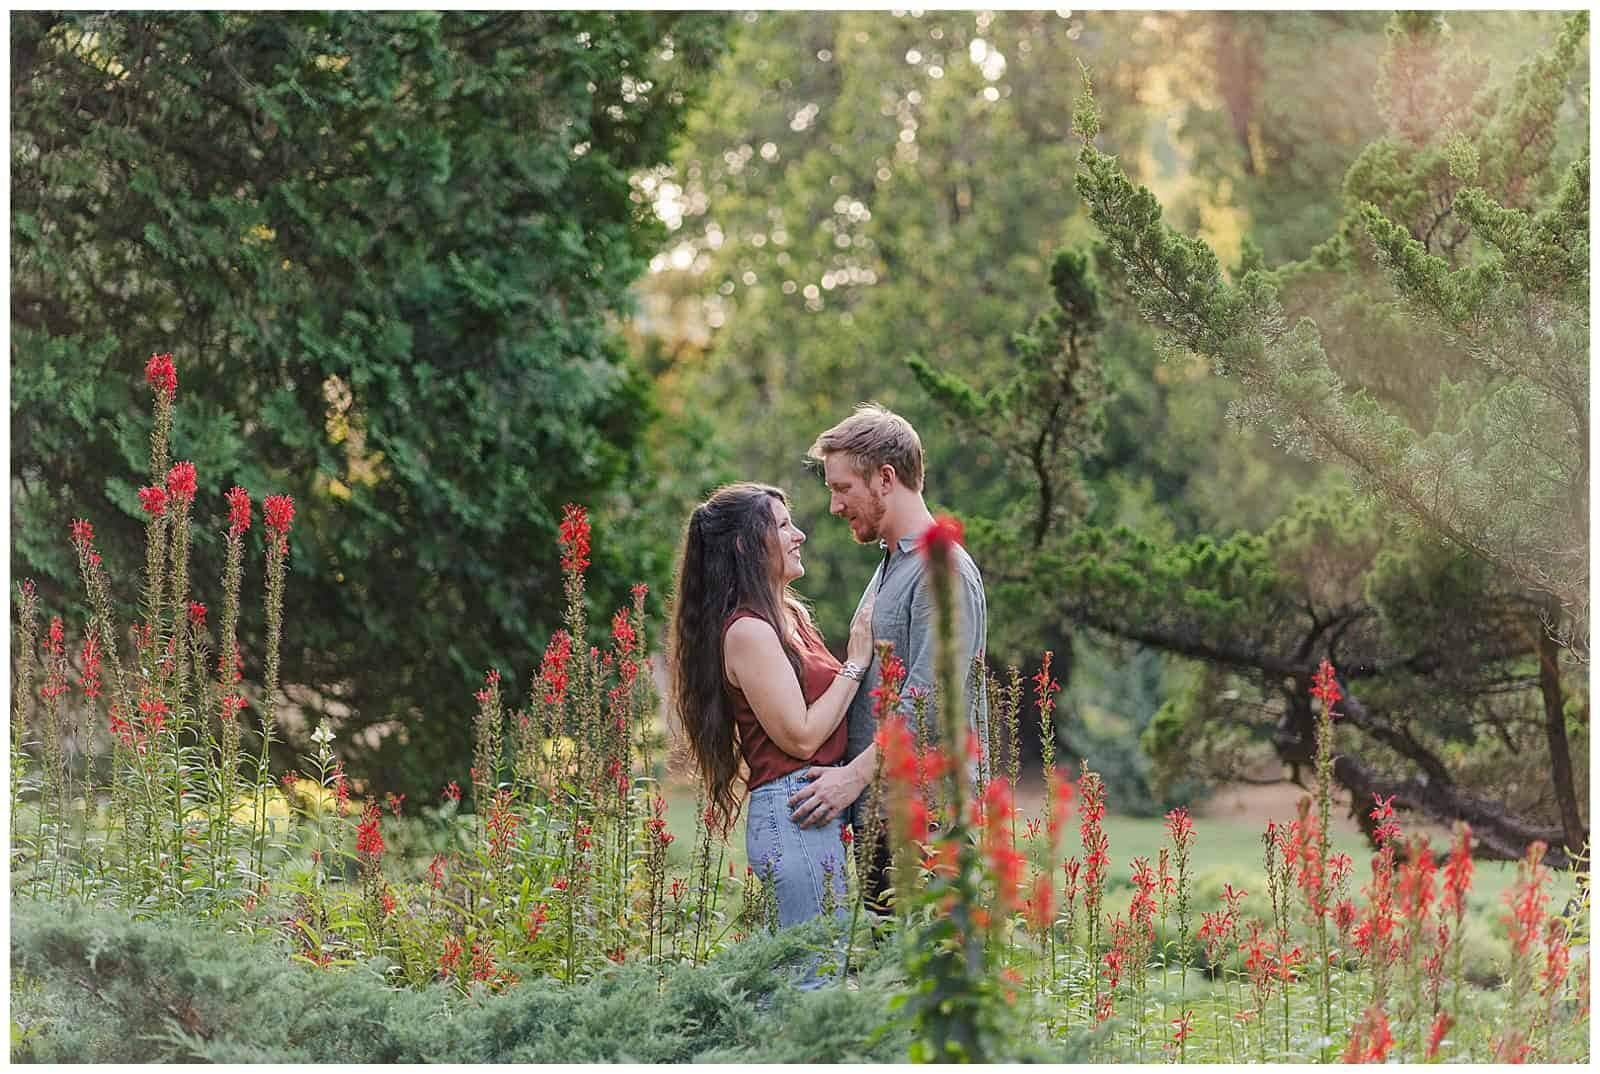 Couple poses for engagement photos in pollinator garden at blandy experimental farm in front royal virginia